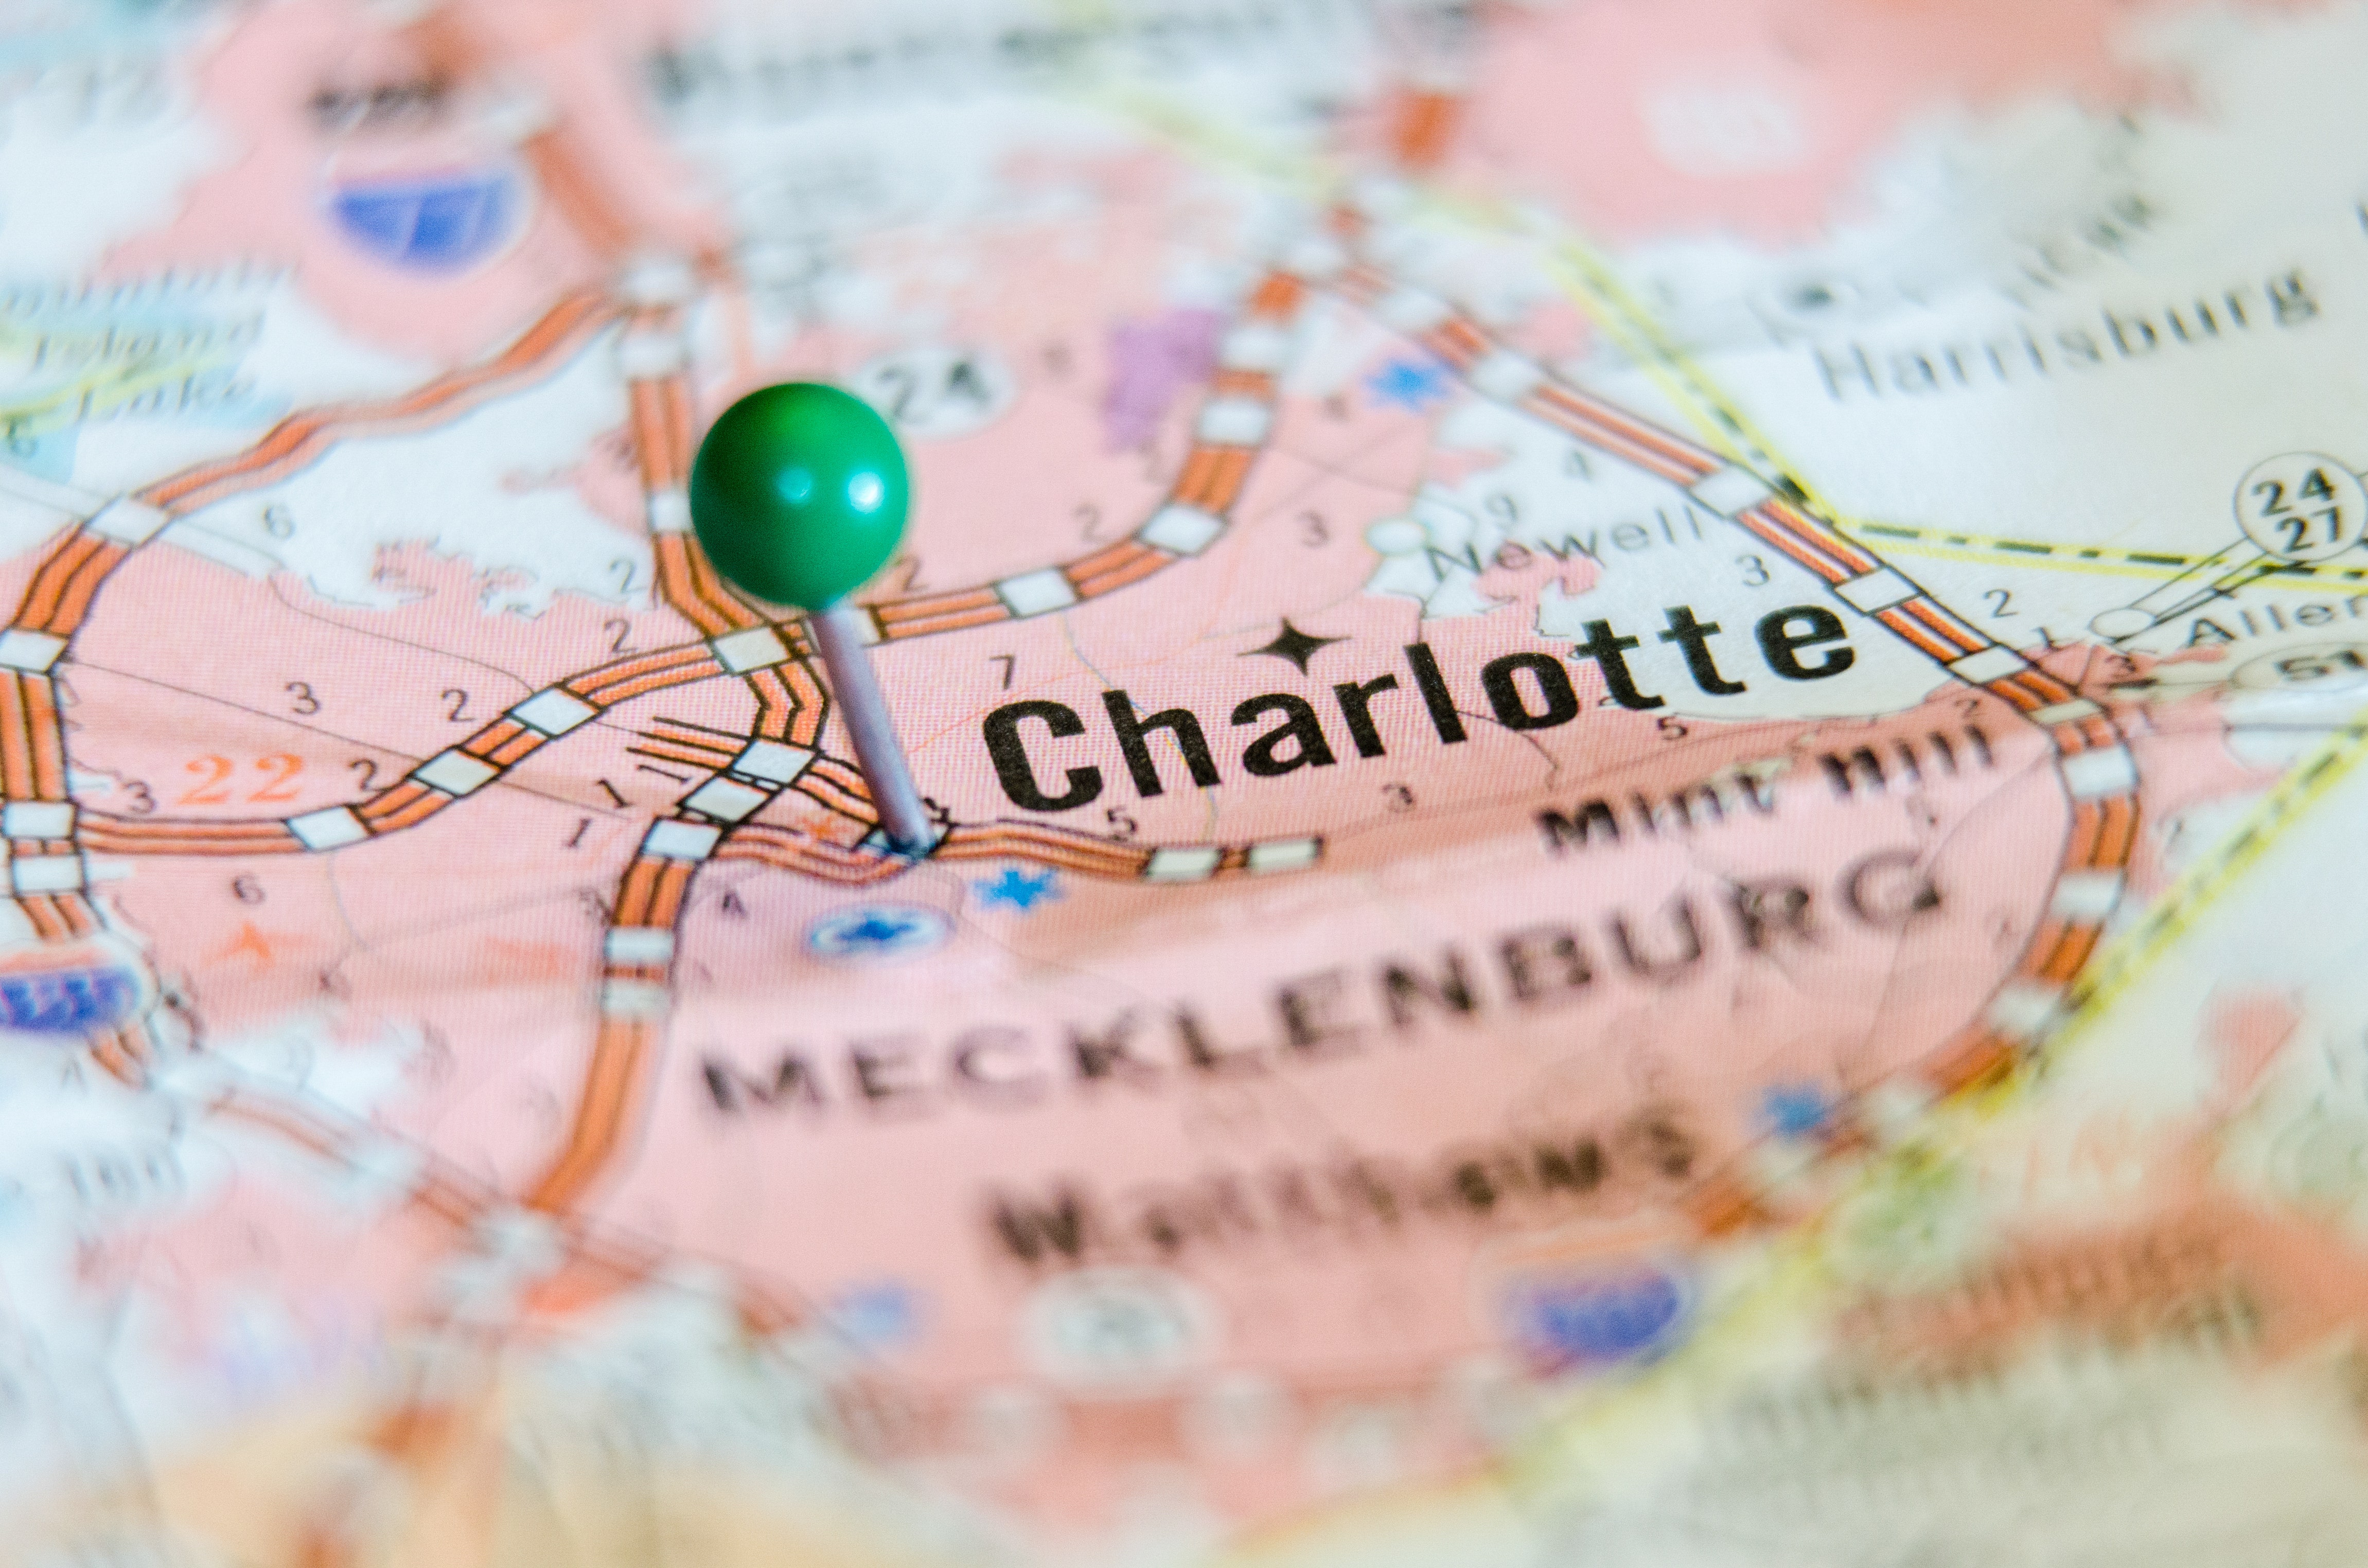 Charlotte, North Carolina Real Estate Investments - Current Investment Opportunities and Market Data